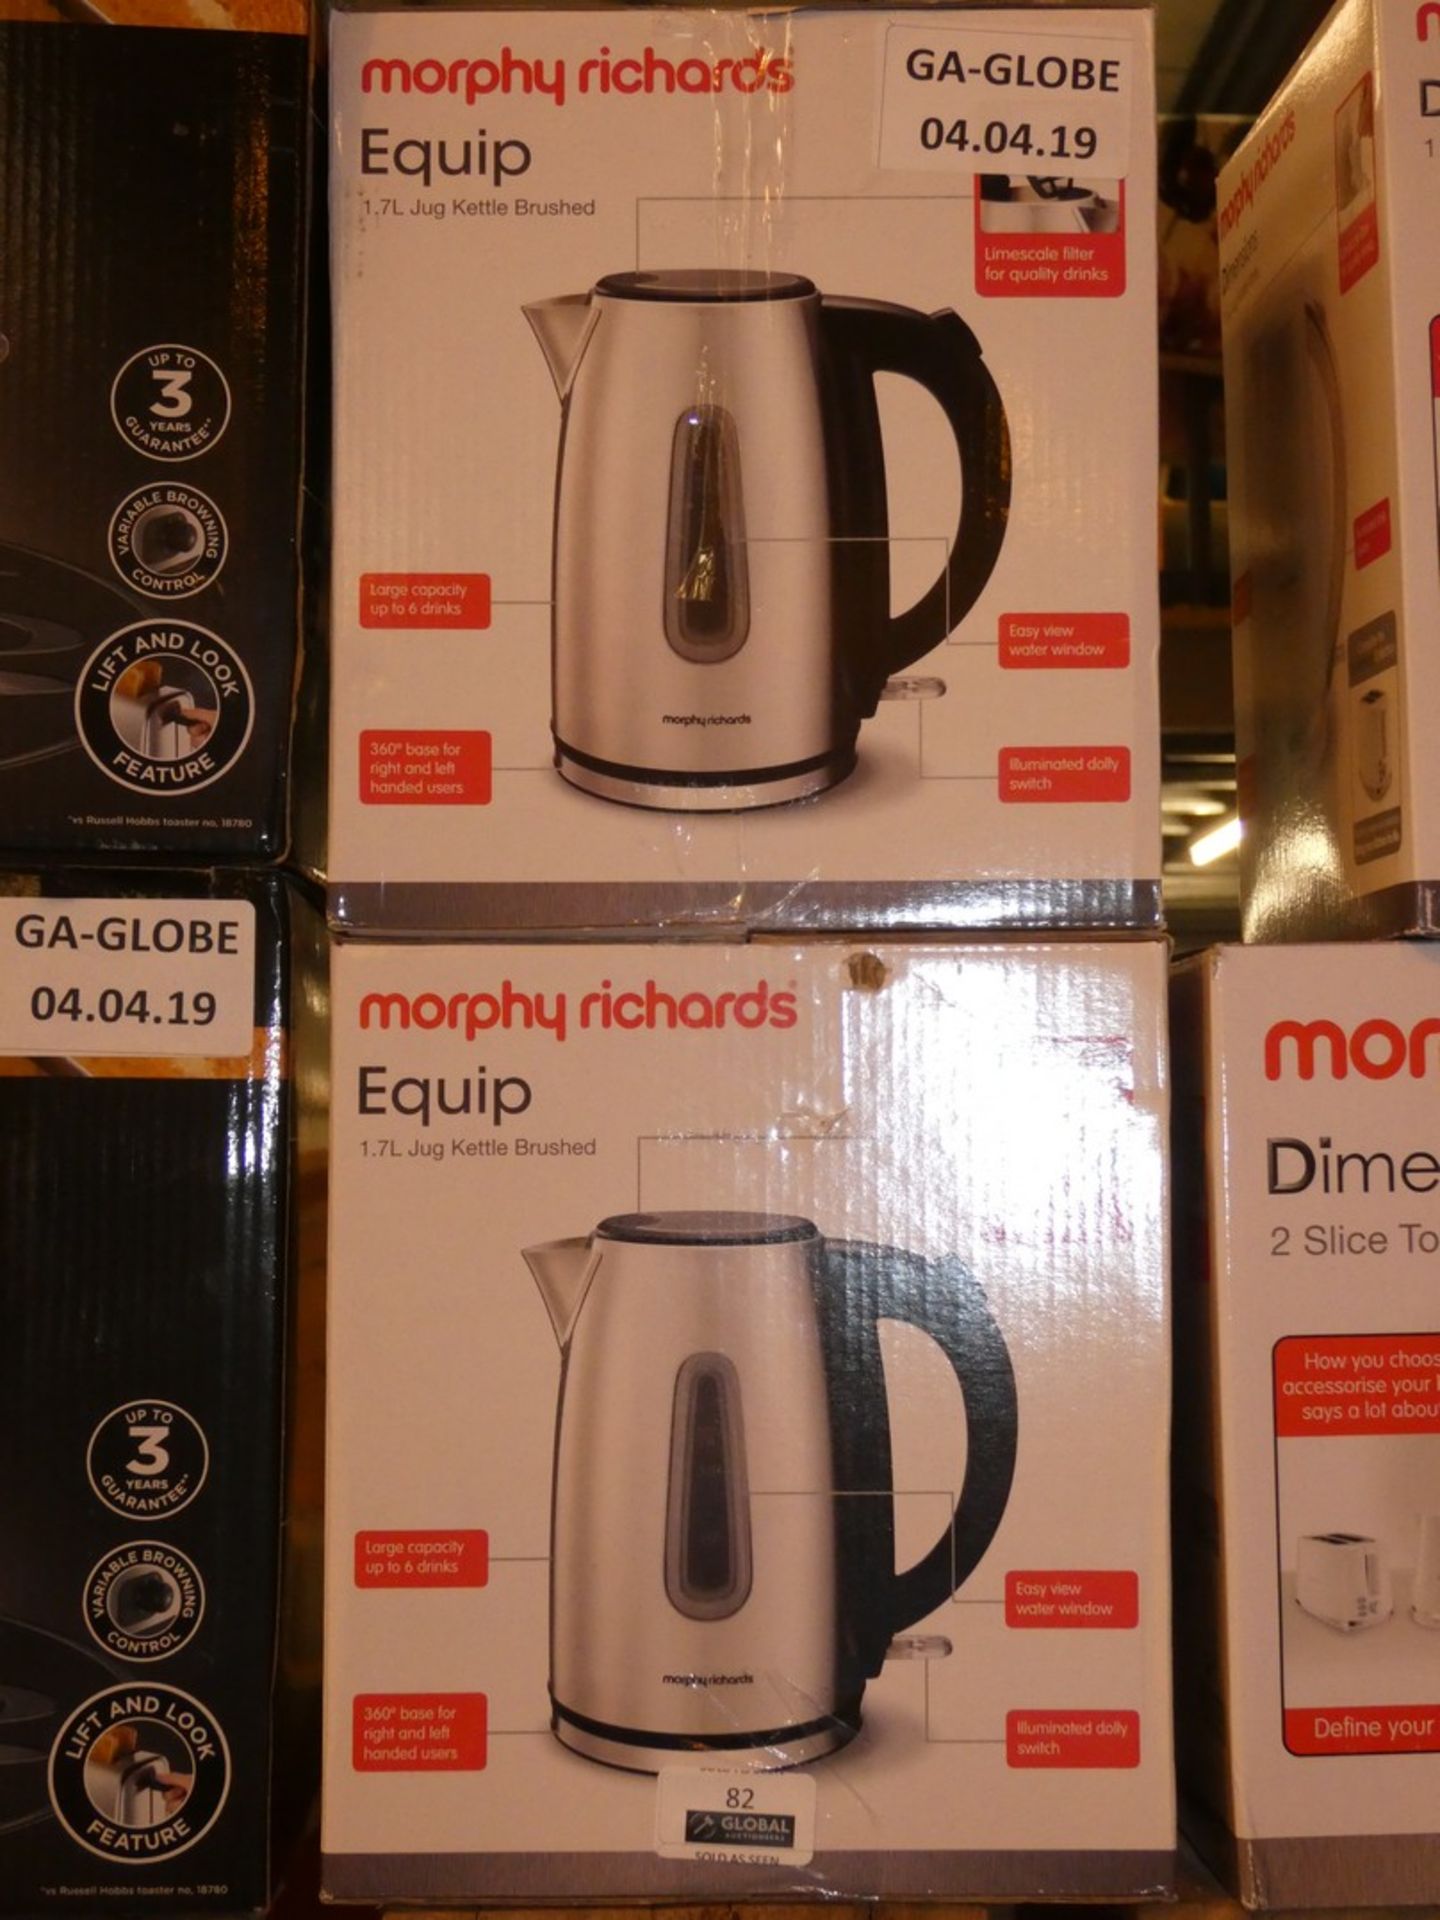 Lot to Contain 2 Boxed Morphy Richards Equip 1.7L Cordless Jug Kettles Combined RRP £50